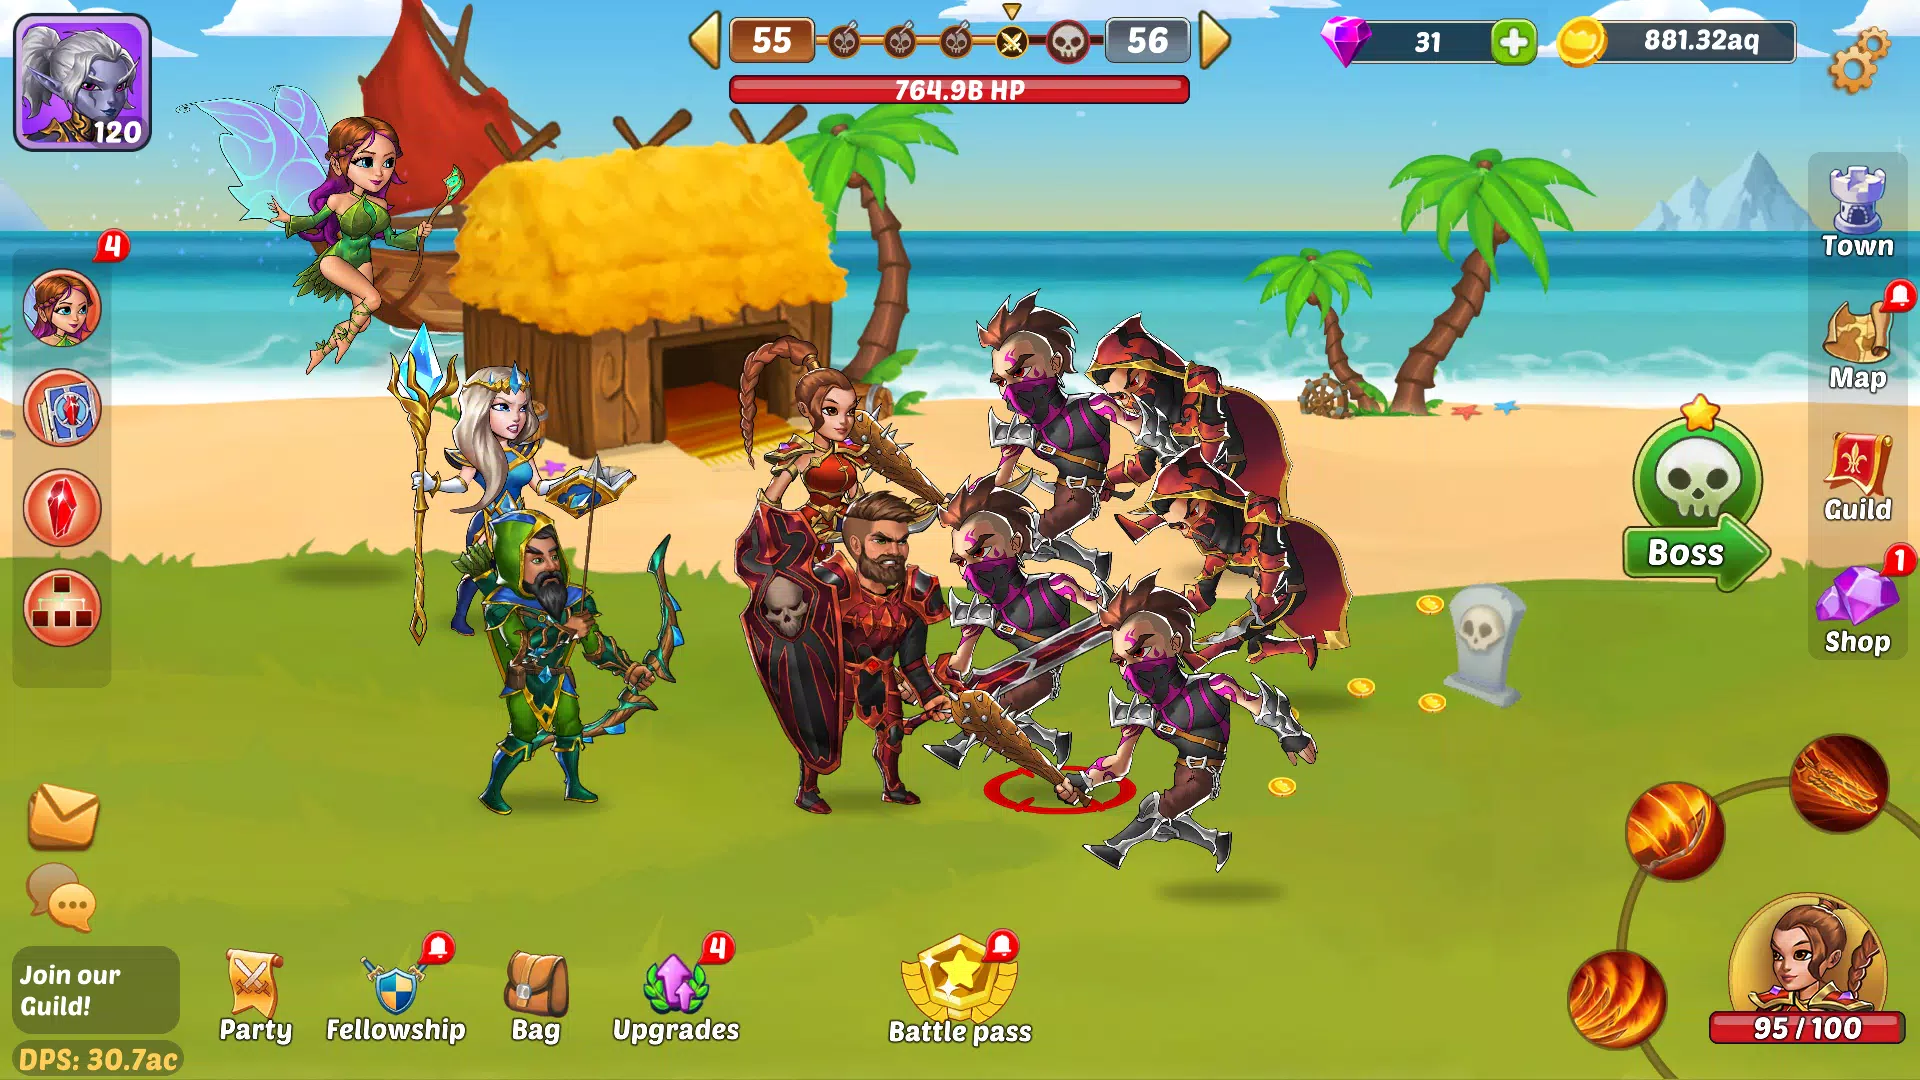 Firestone Online Idle RPG  Download and Play for Free - Epic